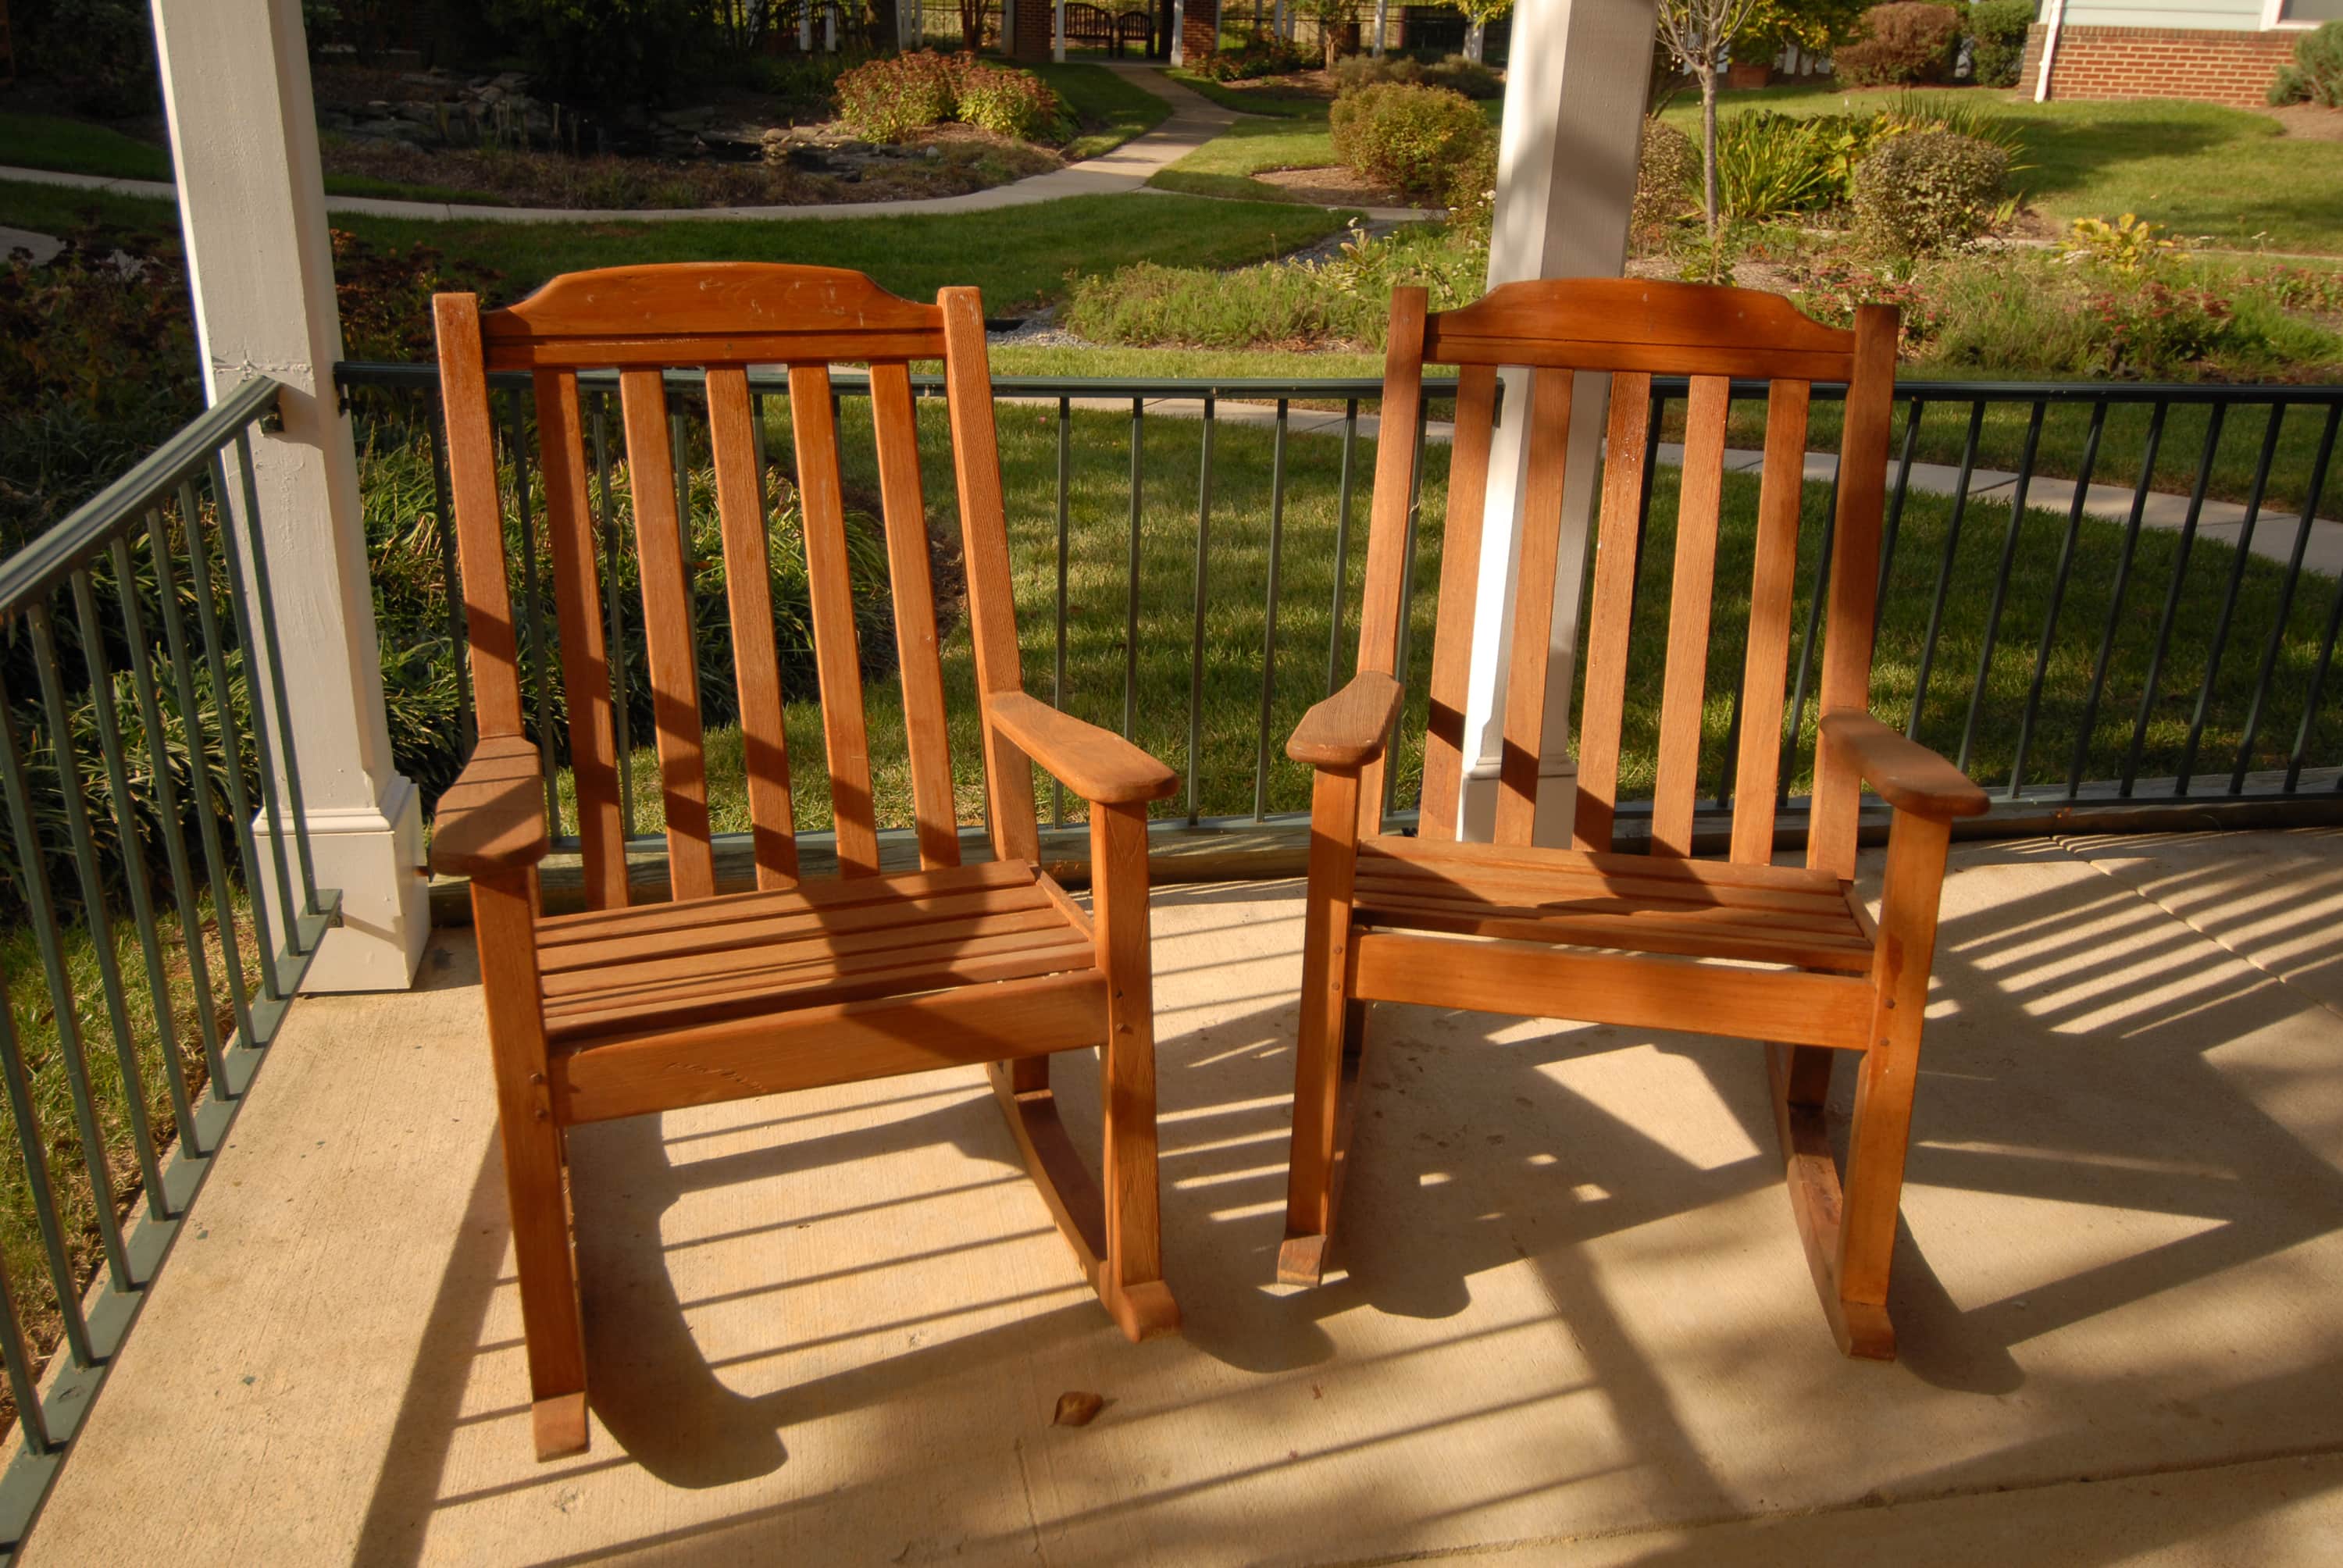 Two chairs on a patio